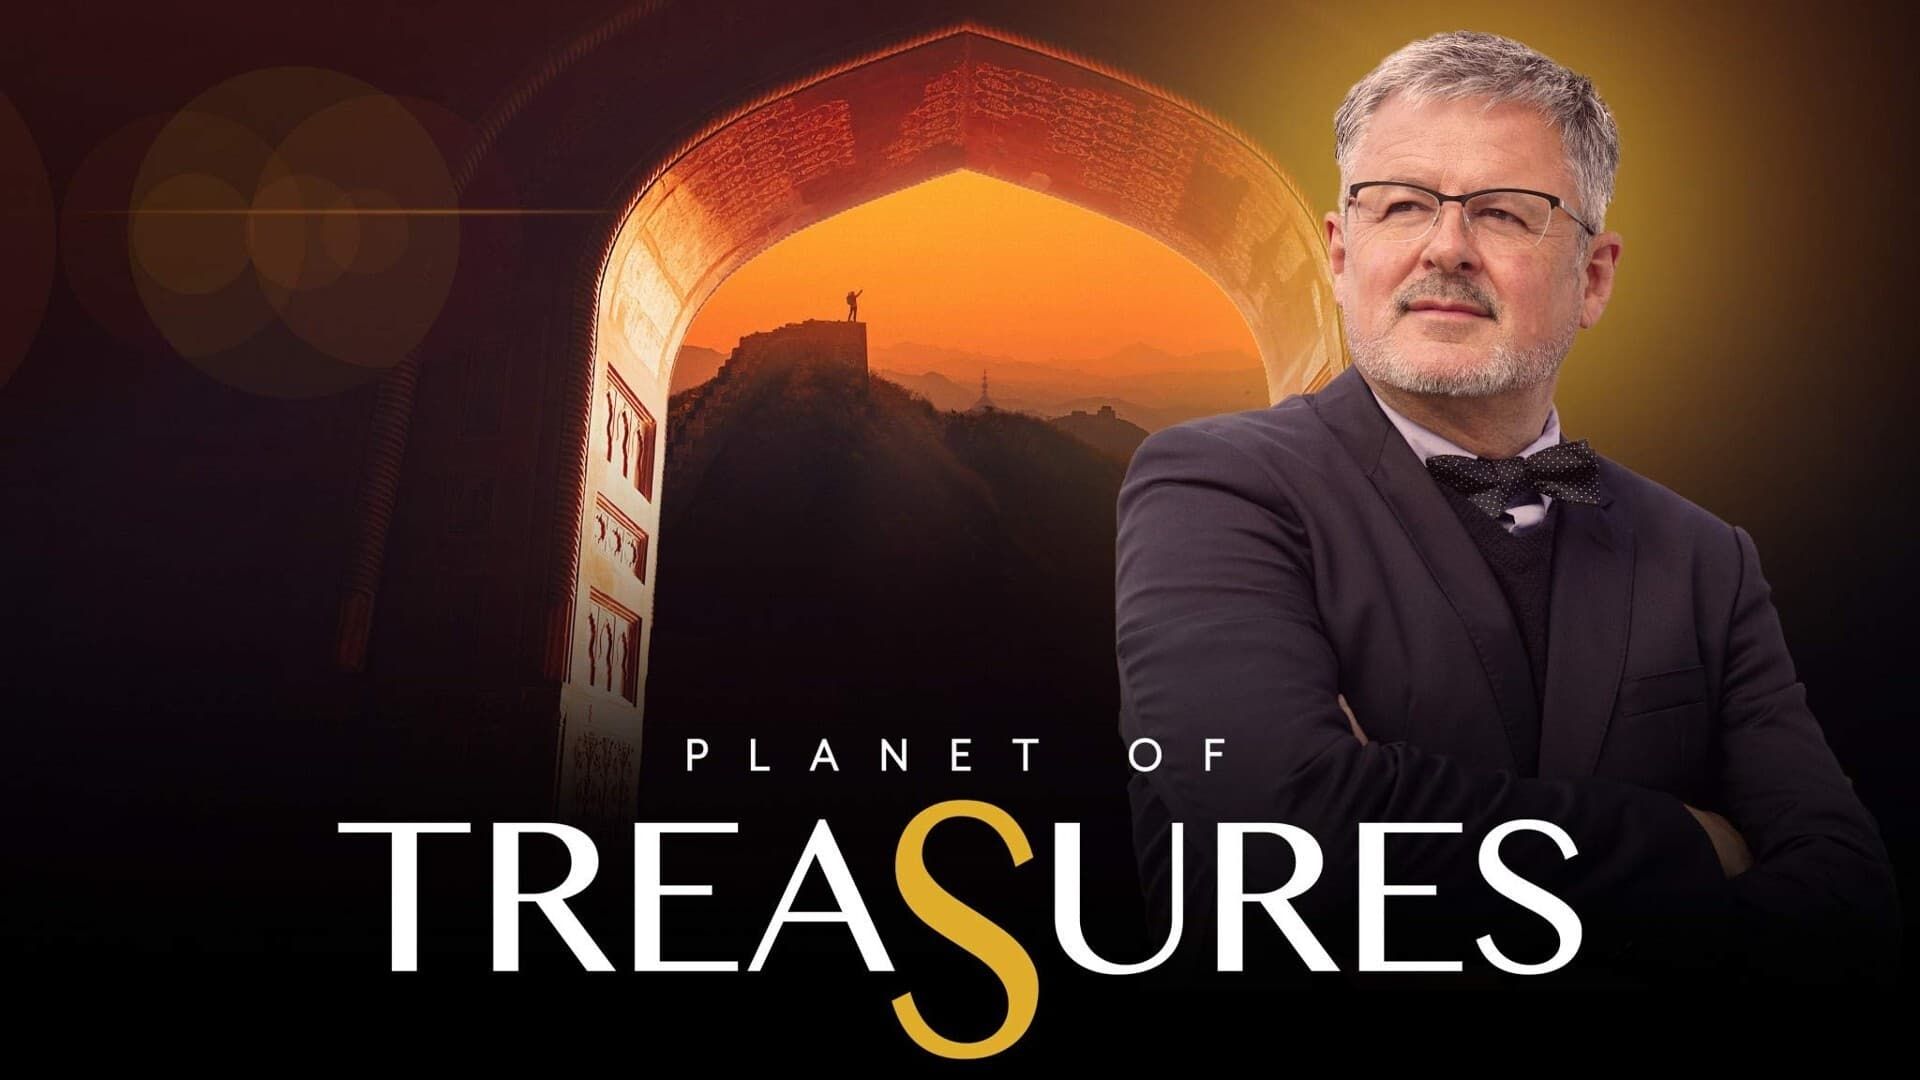 Planet of Treasures background